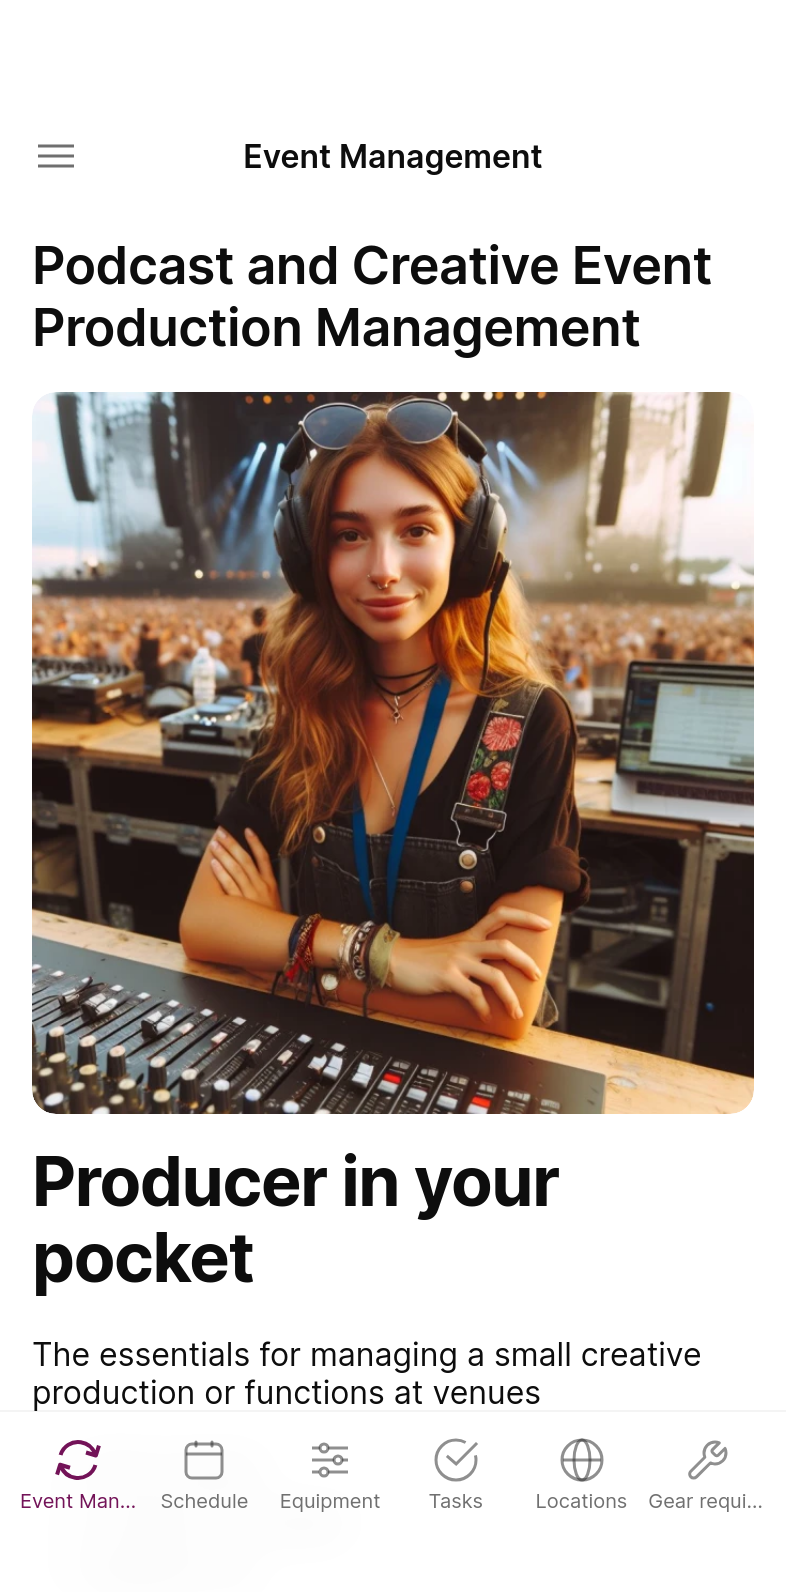 Podcast and Creative Event Production Guru